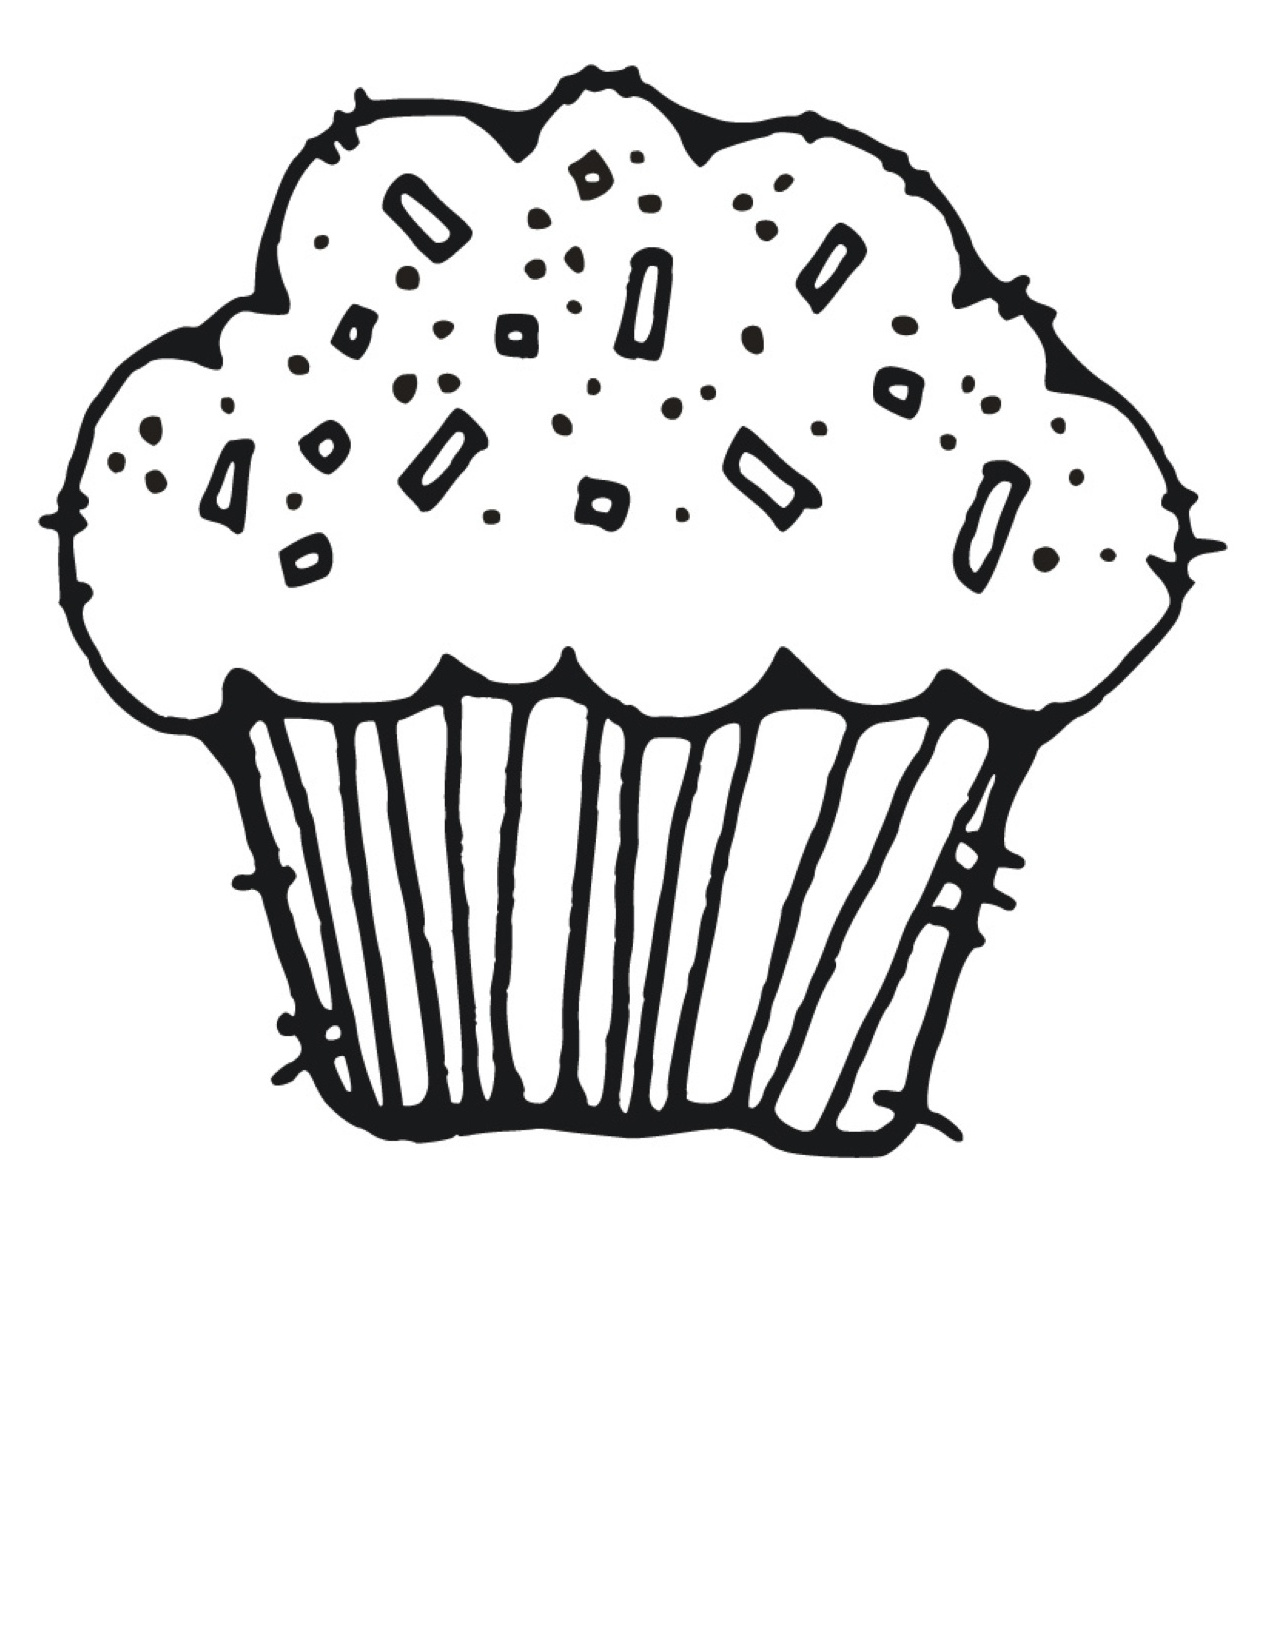 cupcake coloring pages